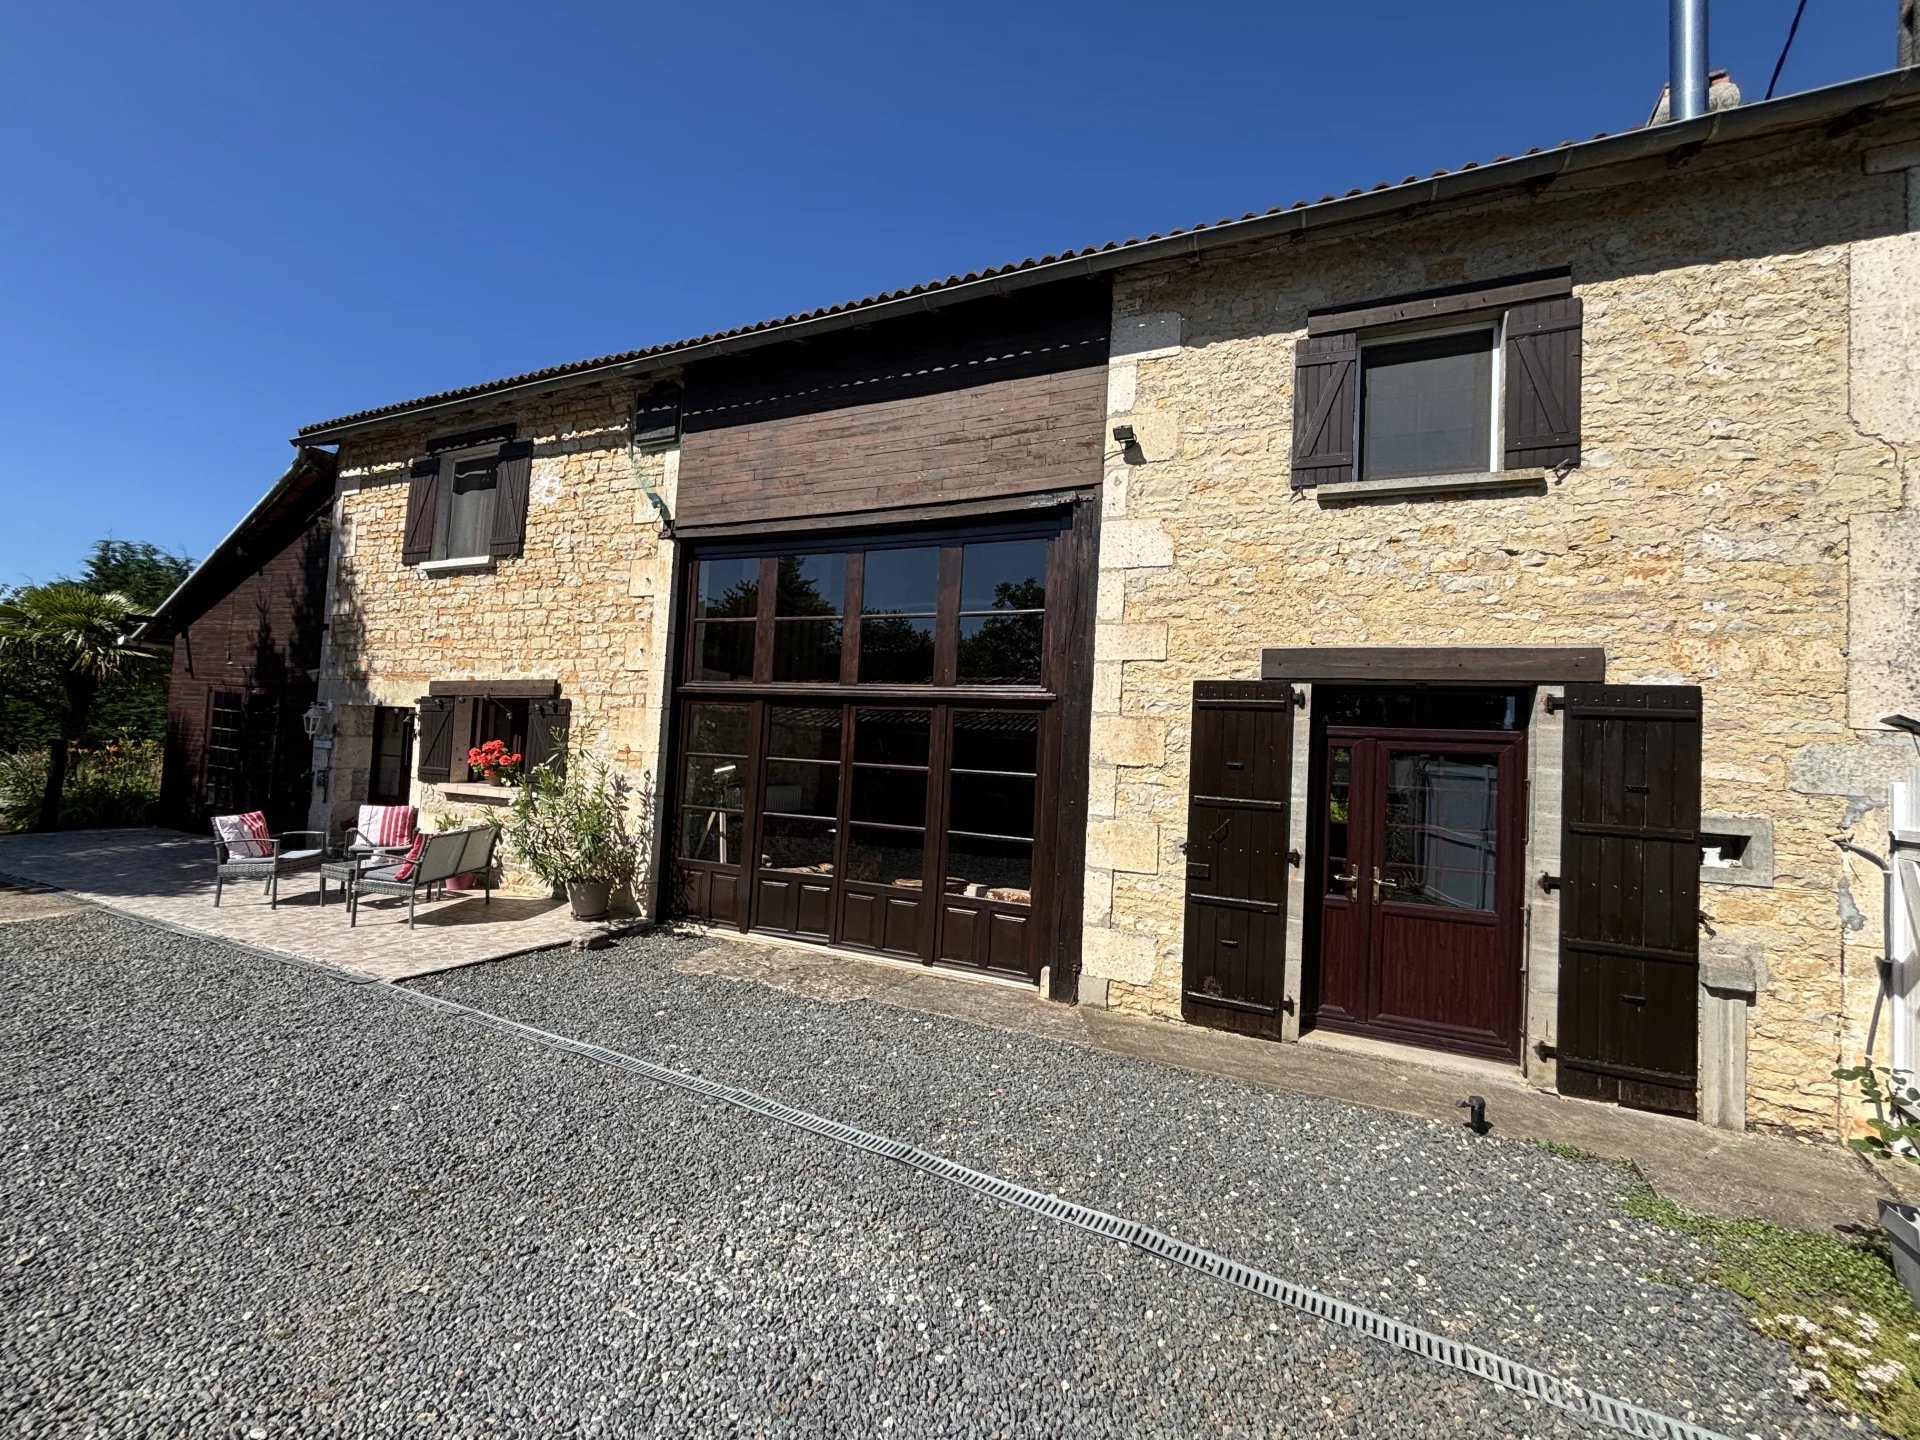 Fantastic spacious 3 bedroom barn conversion with outbuildings, private bar and pretty attached garden